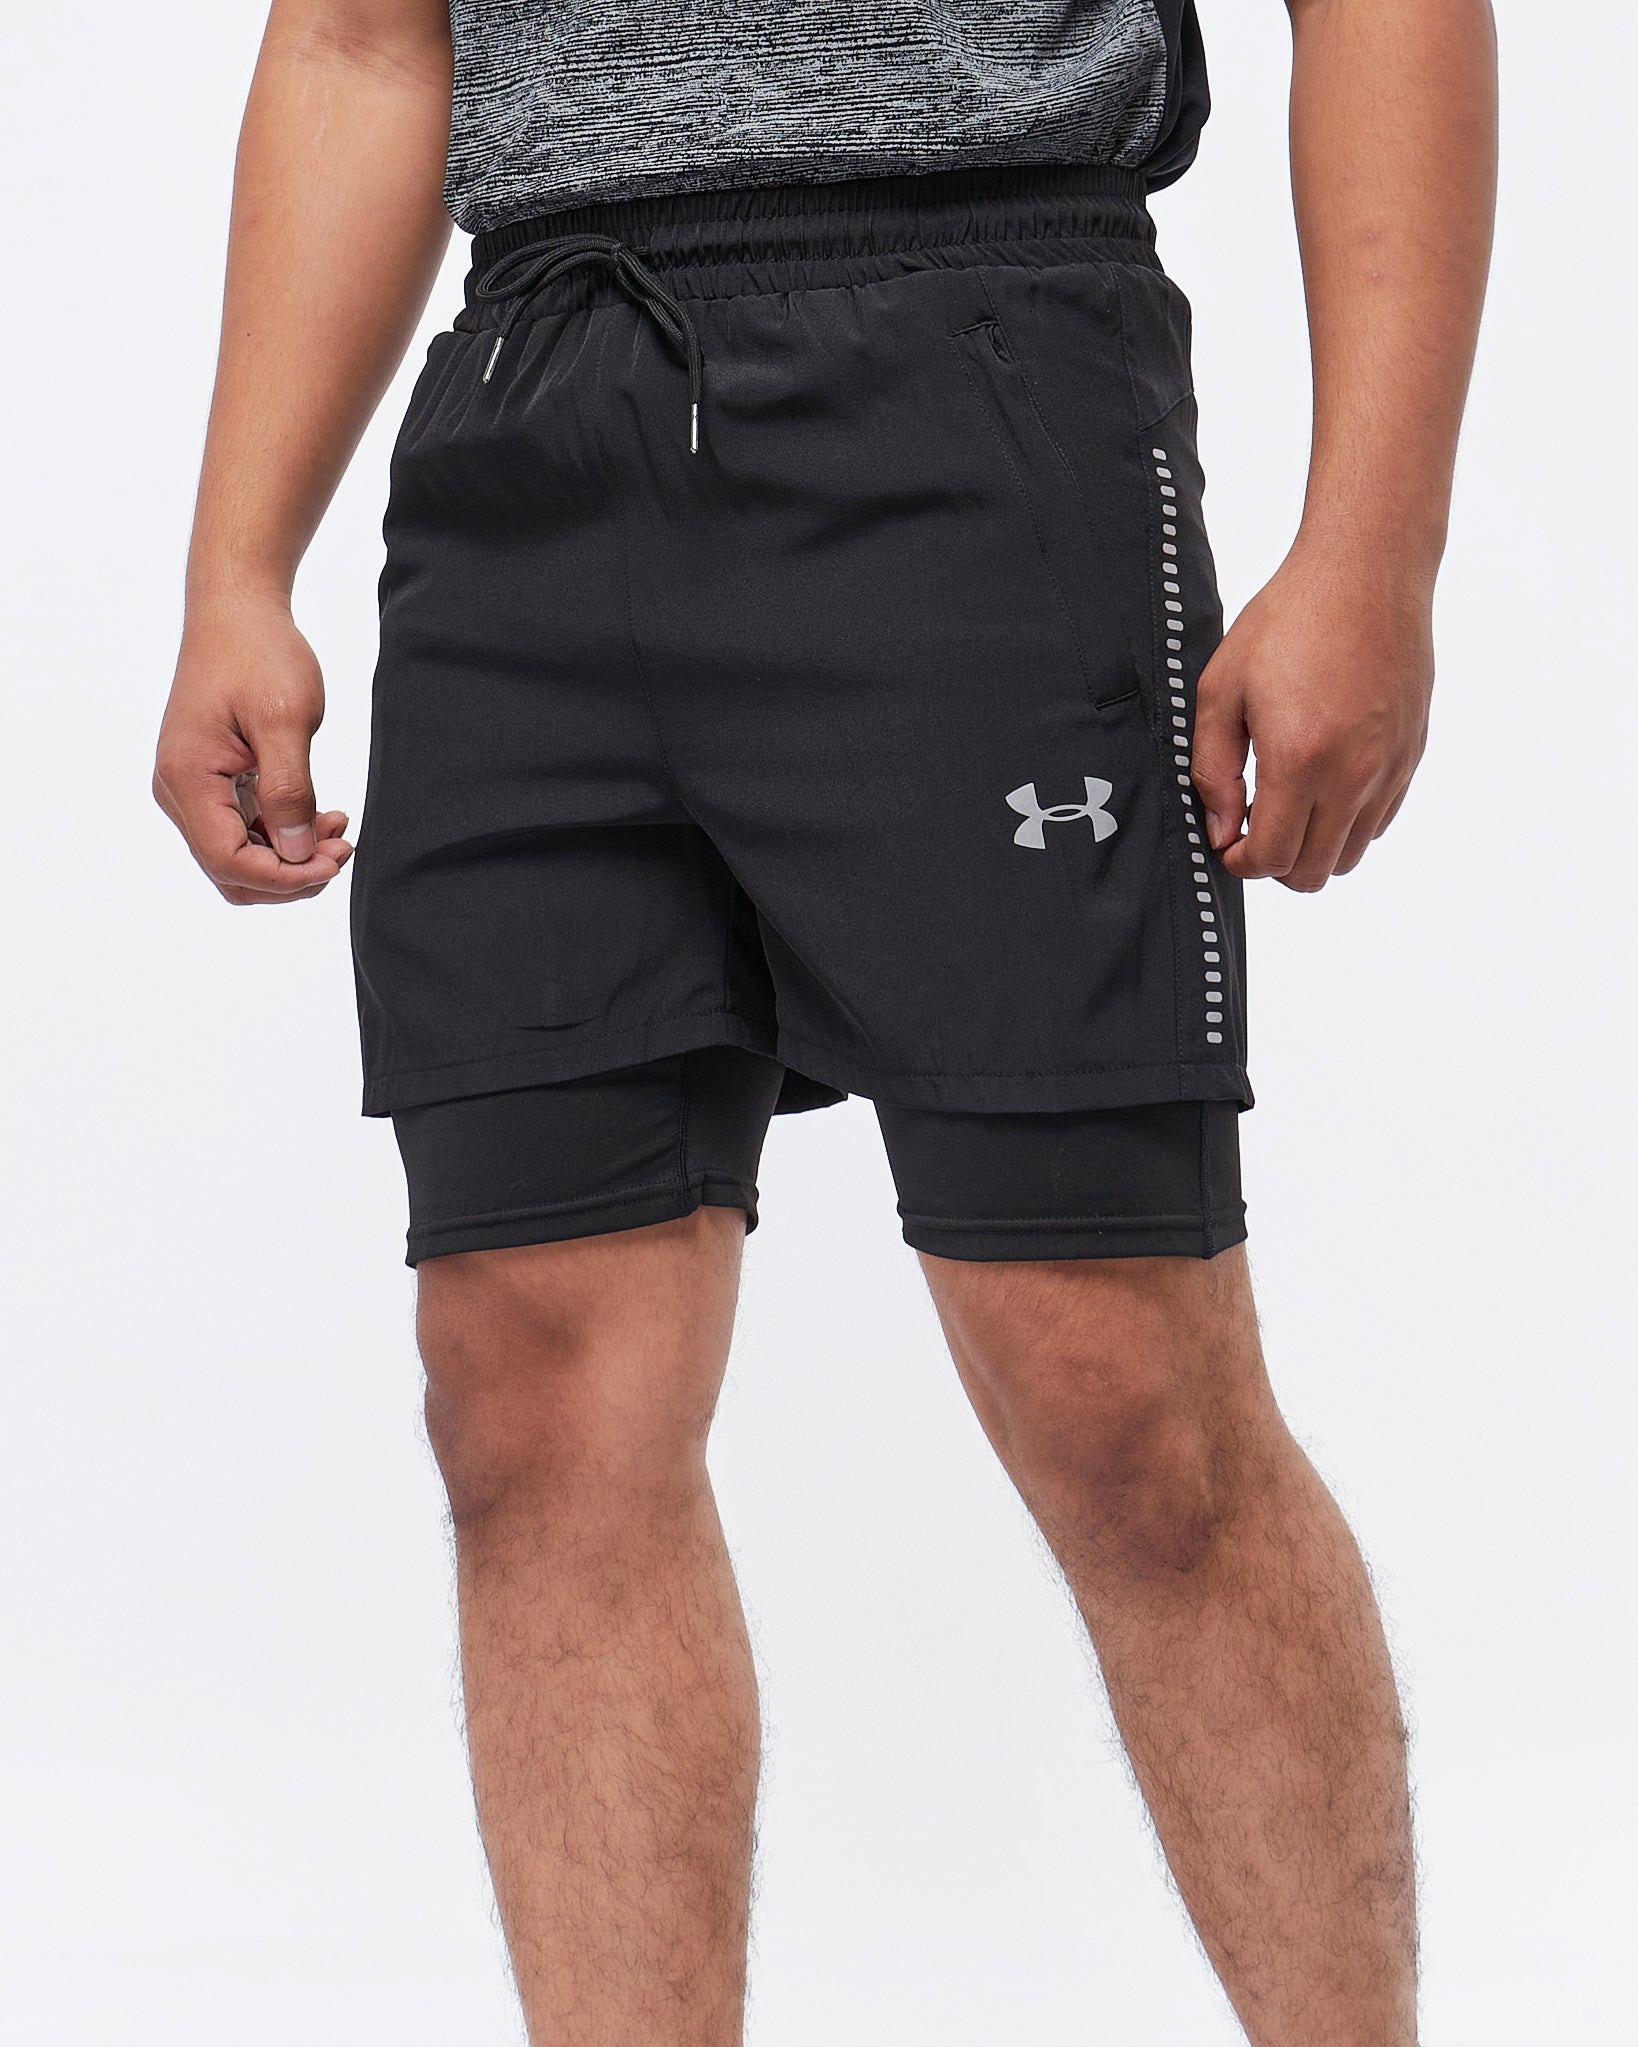 MOI OUTFIT-Side Stripes Printed 2 in 1 Men Sport Shorts 13.90